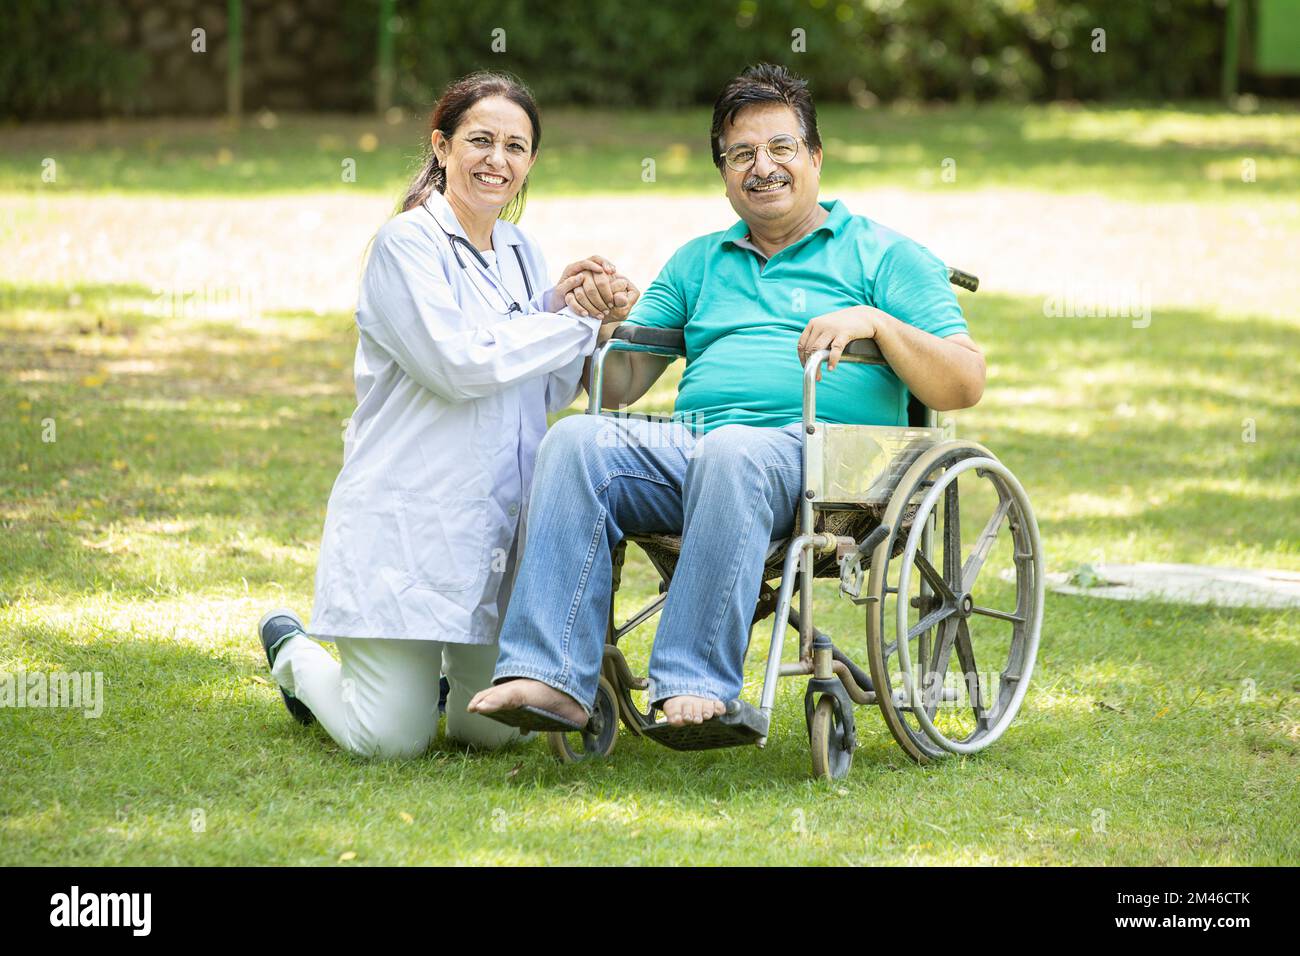 Happy Indian caregiver nurse taking care of senior male patient in a wheelchair outdoor at park, Asian doctor help and support elderly mature older pe Stock Photo